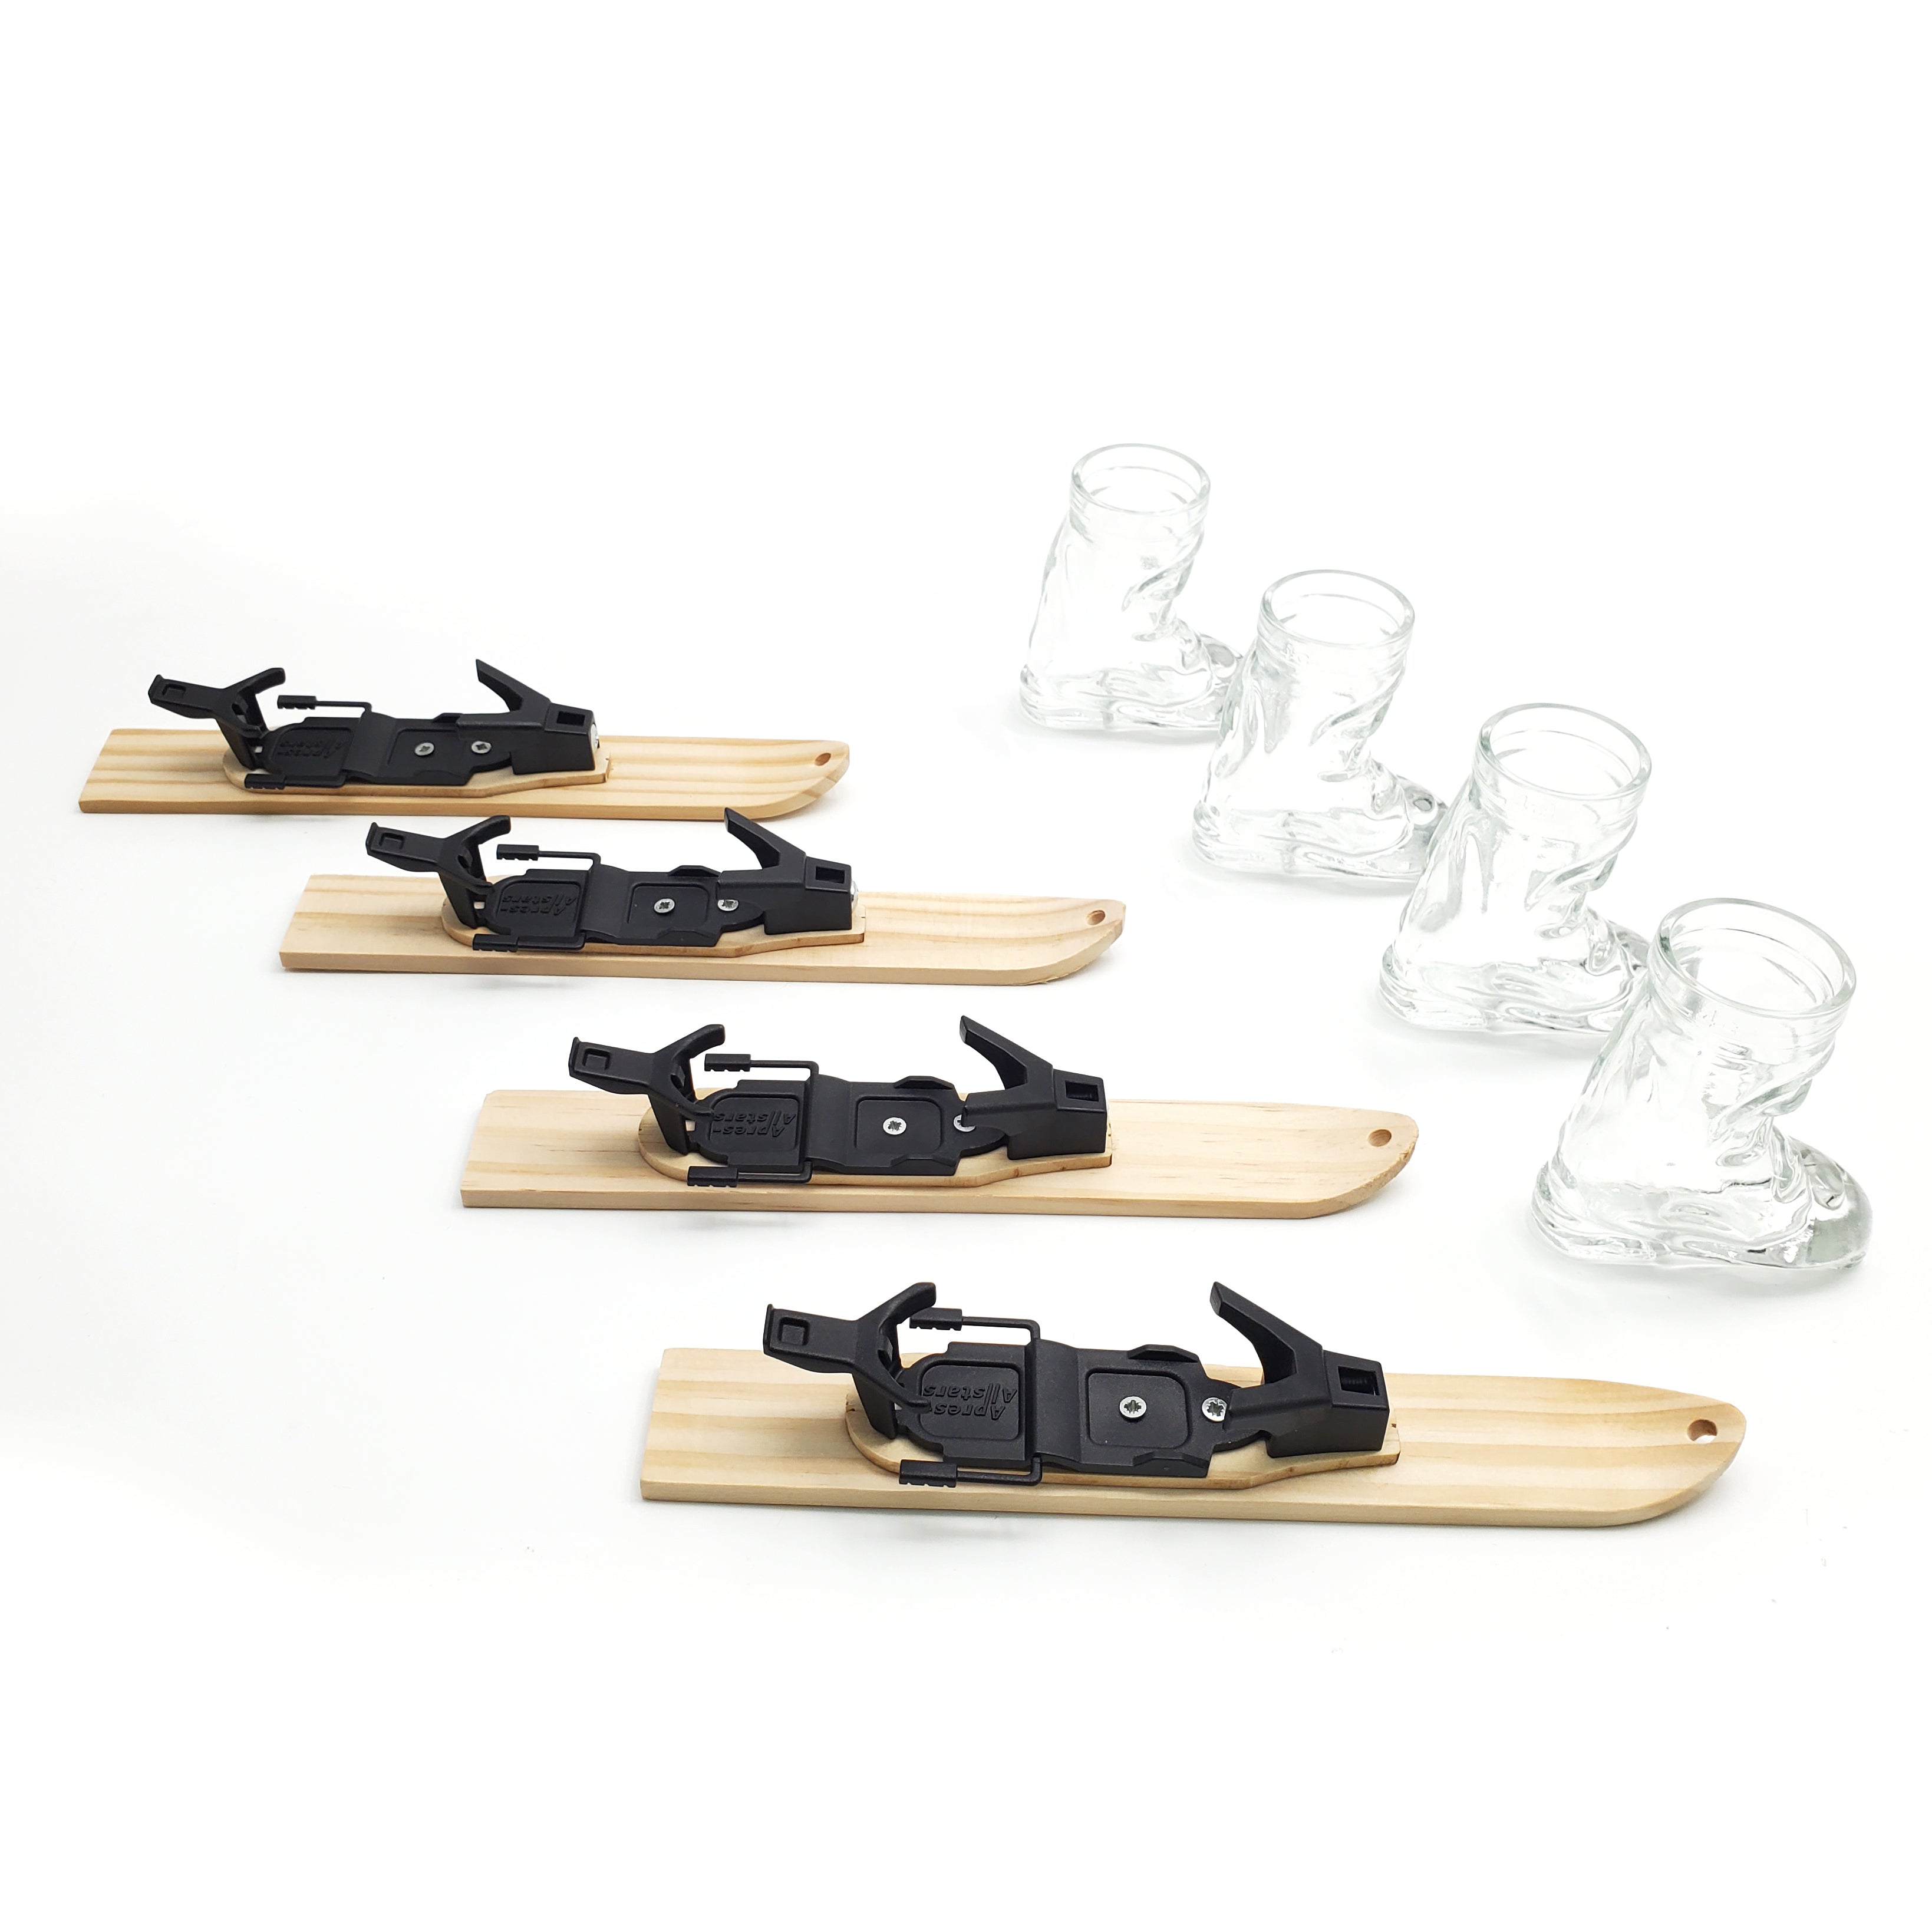 Photo of 4 wooden trays in the shape of small skis. Each ski tray has a hole drilled into the tip of the ski and a small raised mounting platform for the Apr√®s Allstar boot shot glass and bindings. Image is set against a white backdrop